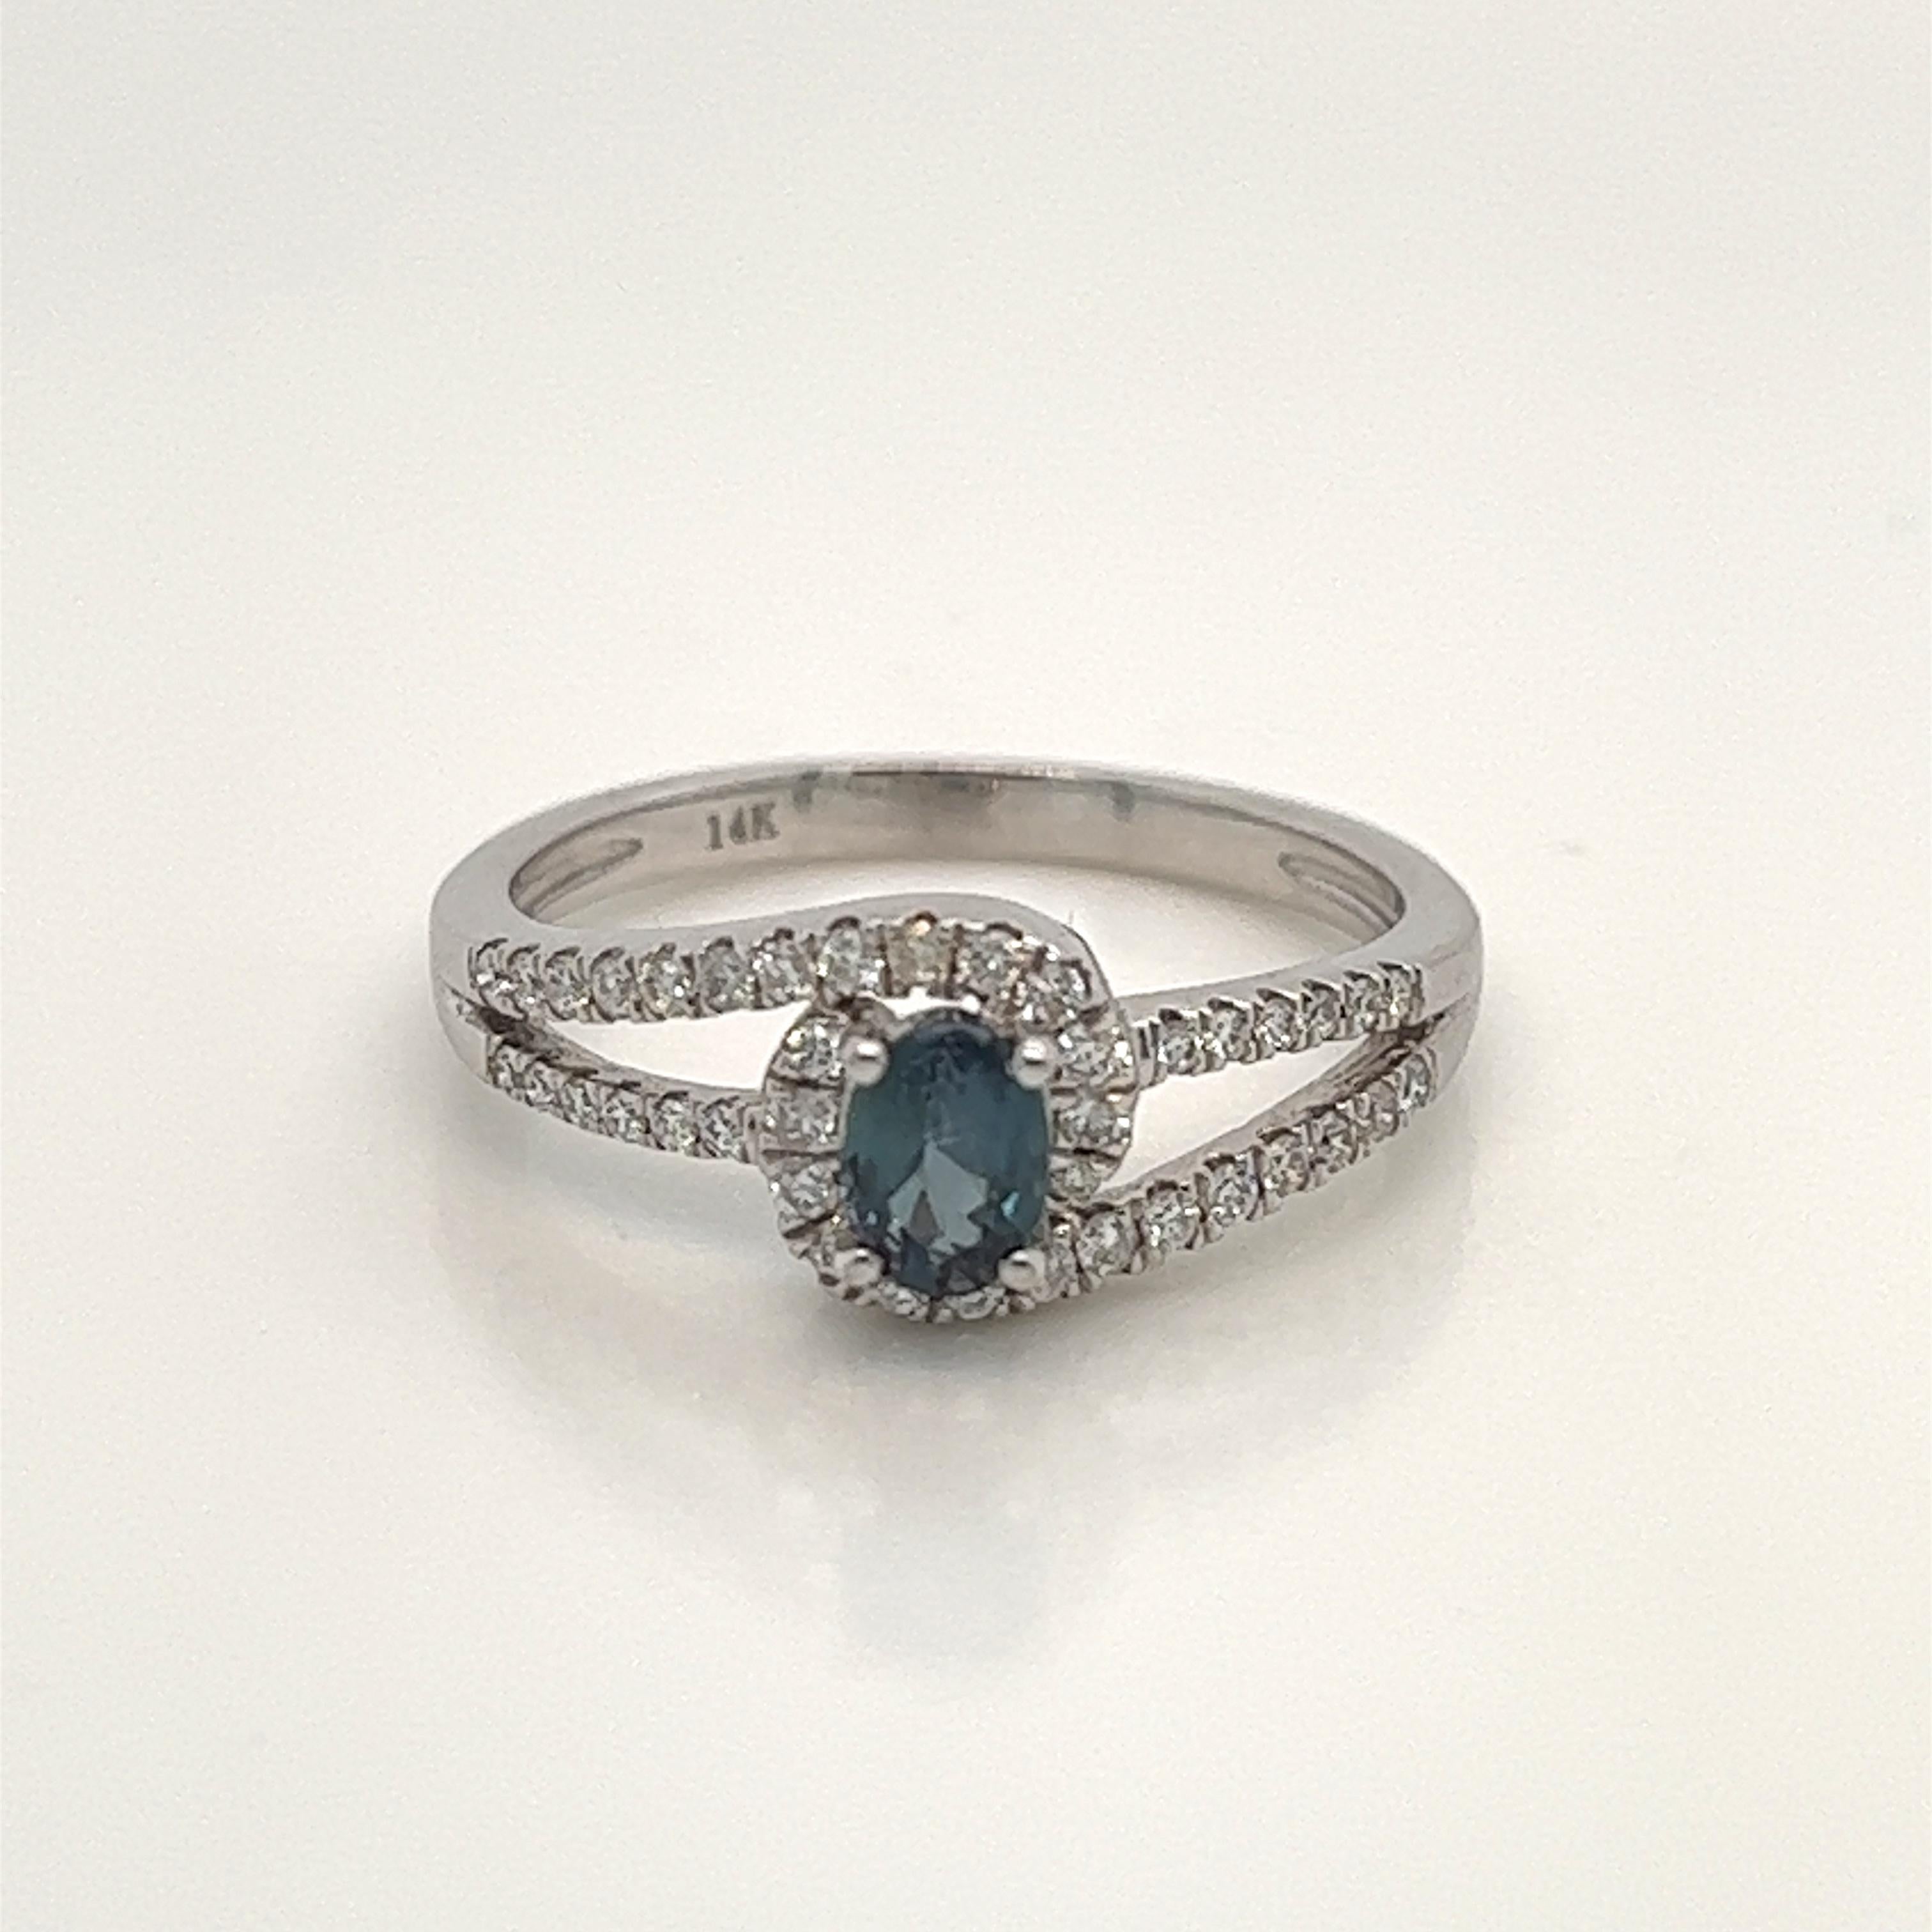 This is a gorgeous natural AAA quality oval Alexandrite surrounded by dainty diamonds that is set in solid 14K white gold. This ring features a natural 0.45carat oval alexandrite that is certified by the Gemological Institute of America (GIA). The